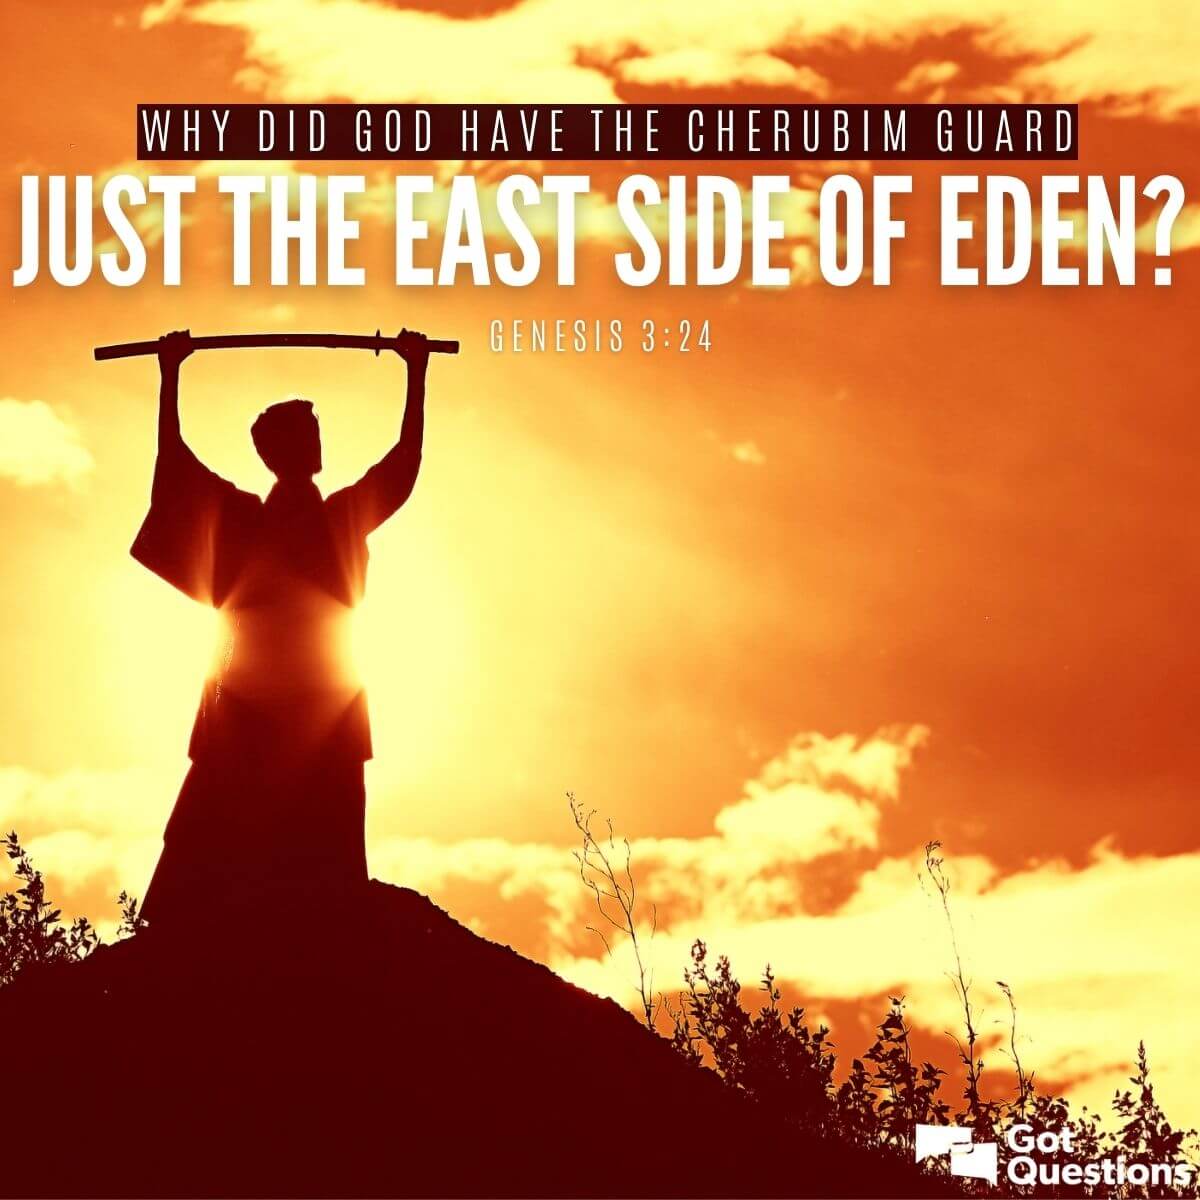 Why did God have the cherubim guard just the east side of Eden (Genesis